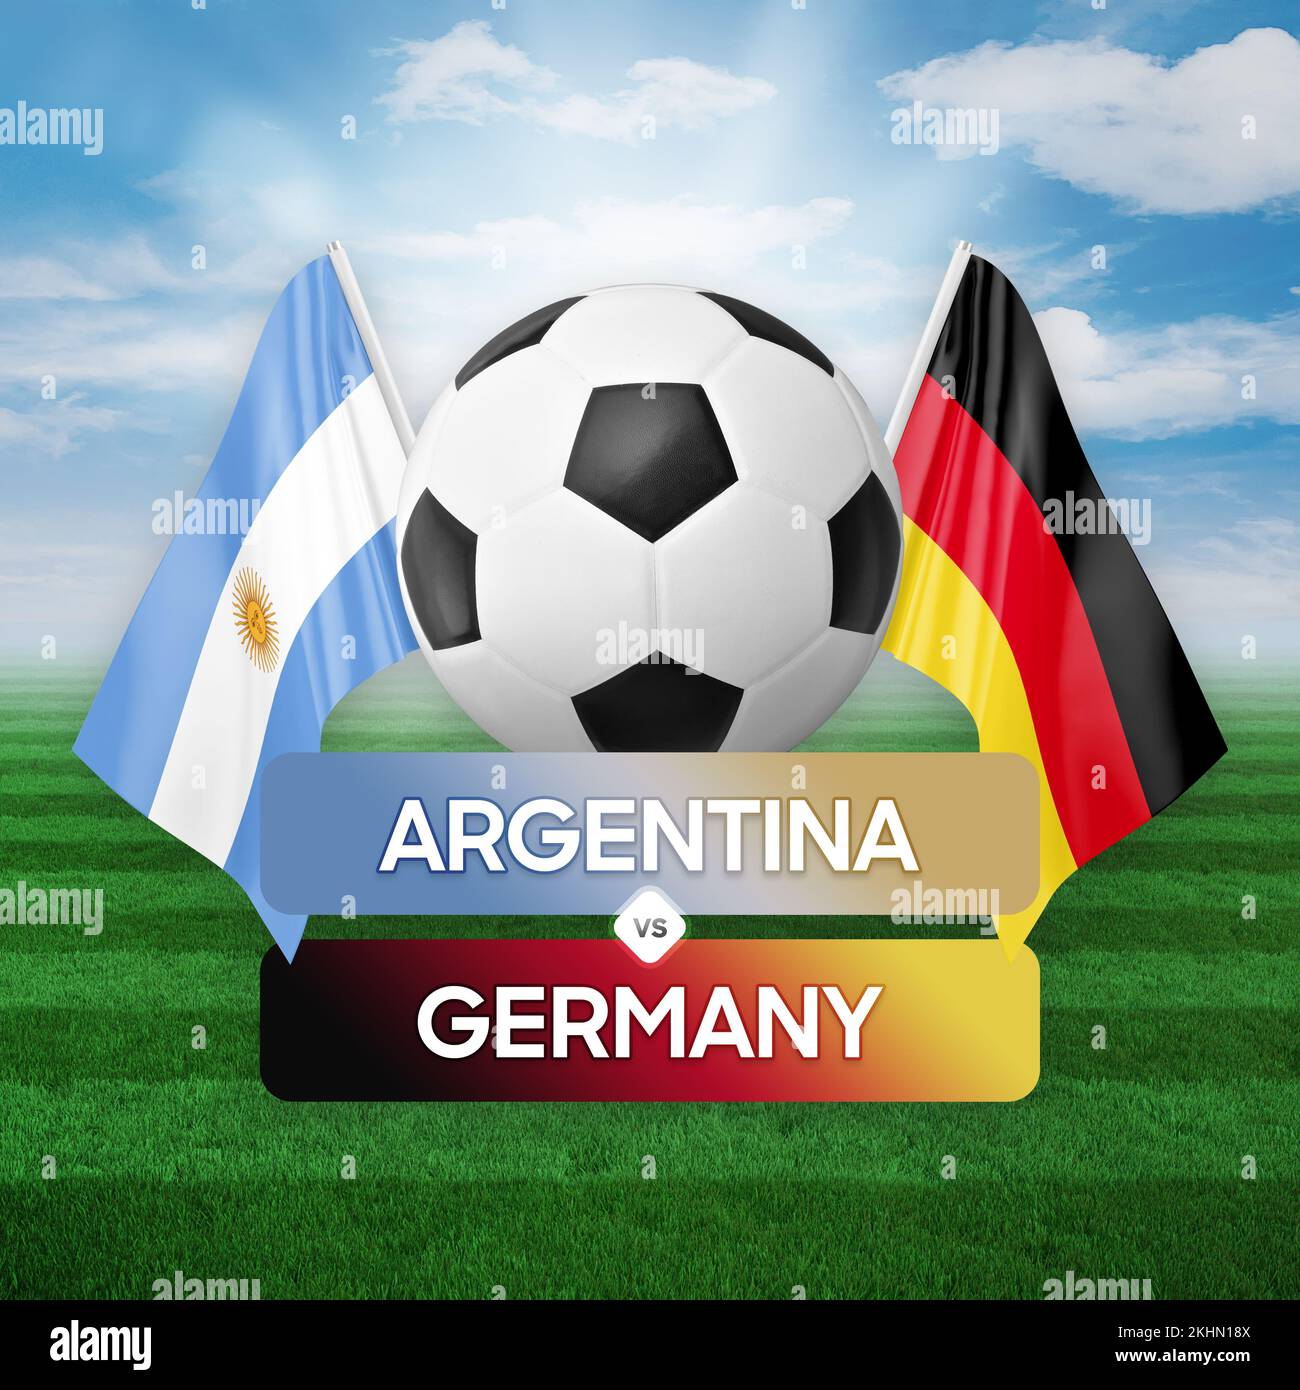 Argentina vs Germany national teams soccer football match competition